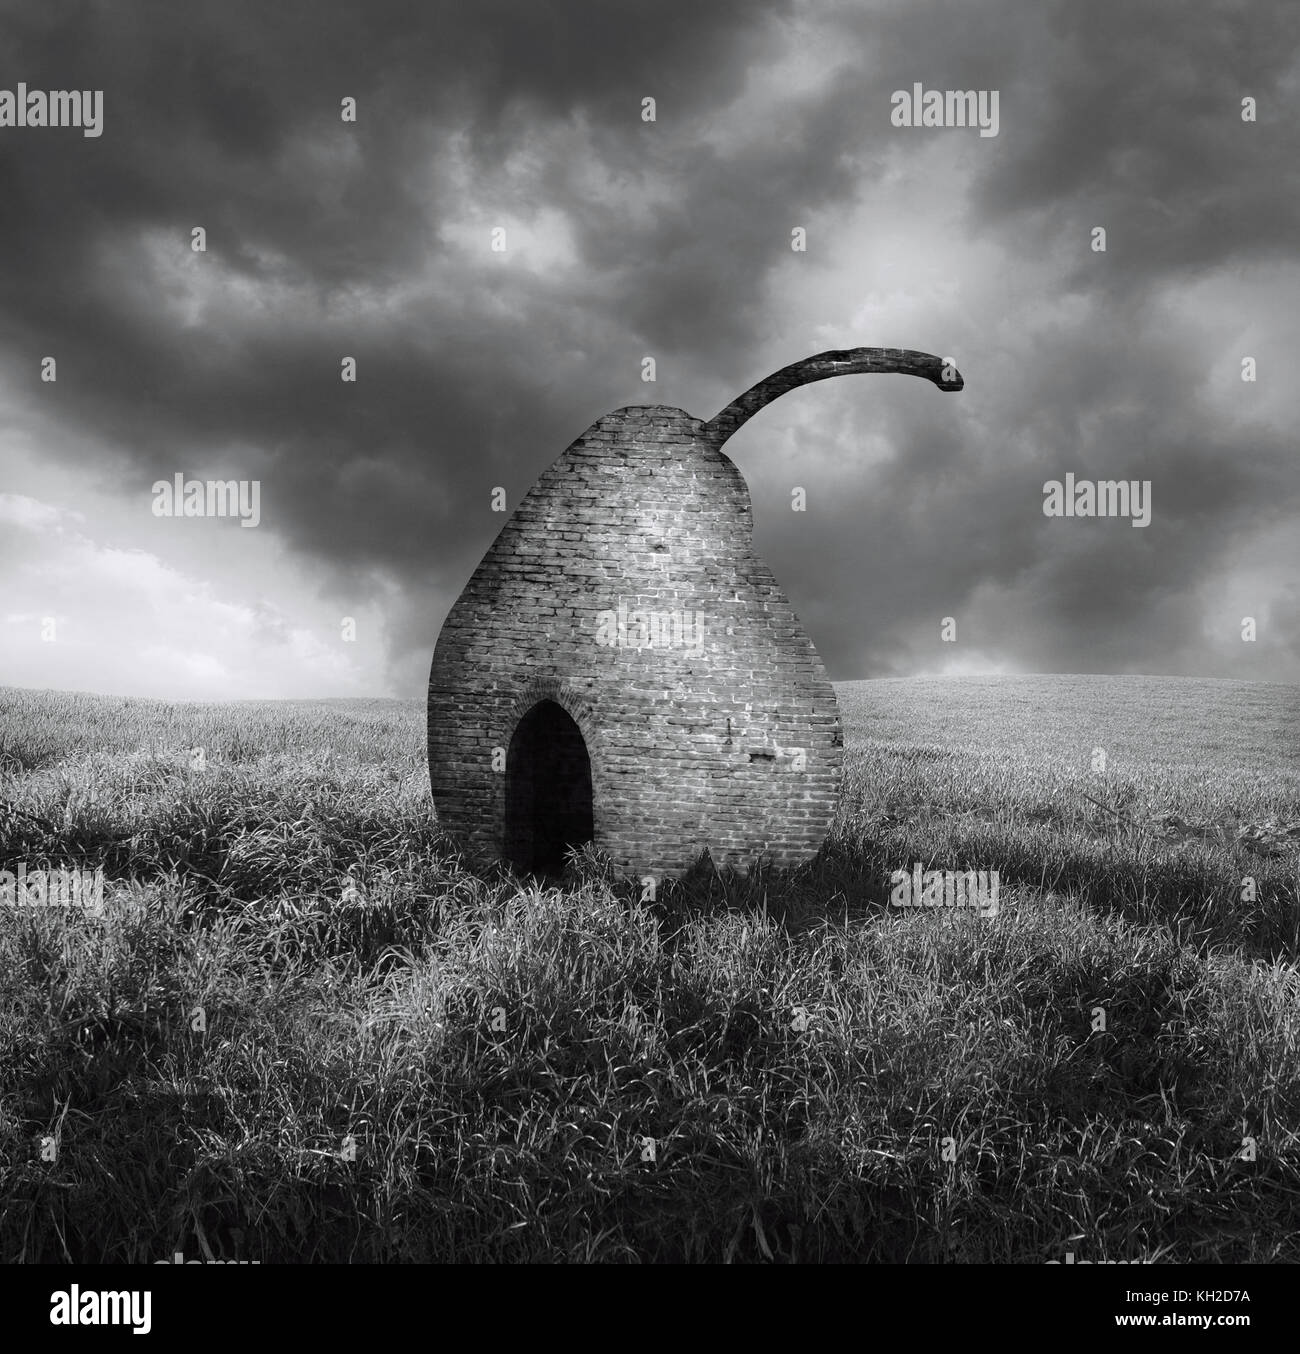 Elegant black and white surreal image representing a brick pearl isolated in a countryside landscape Stock Photo